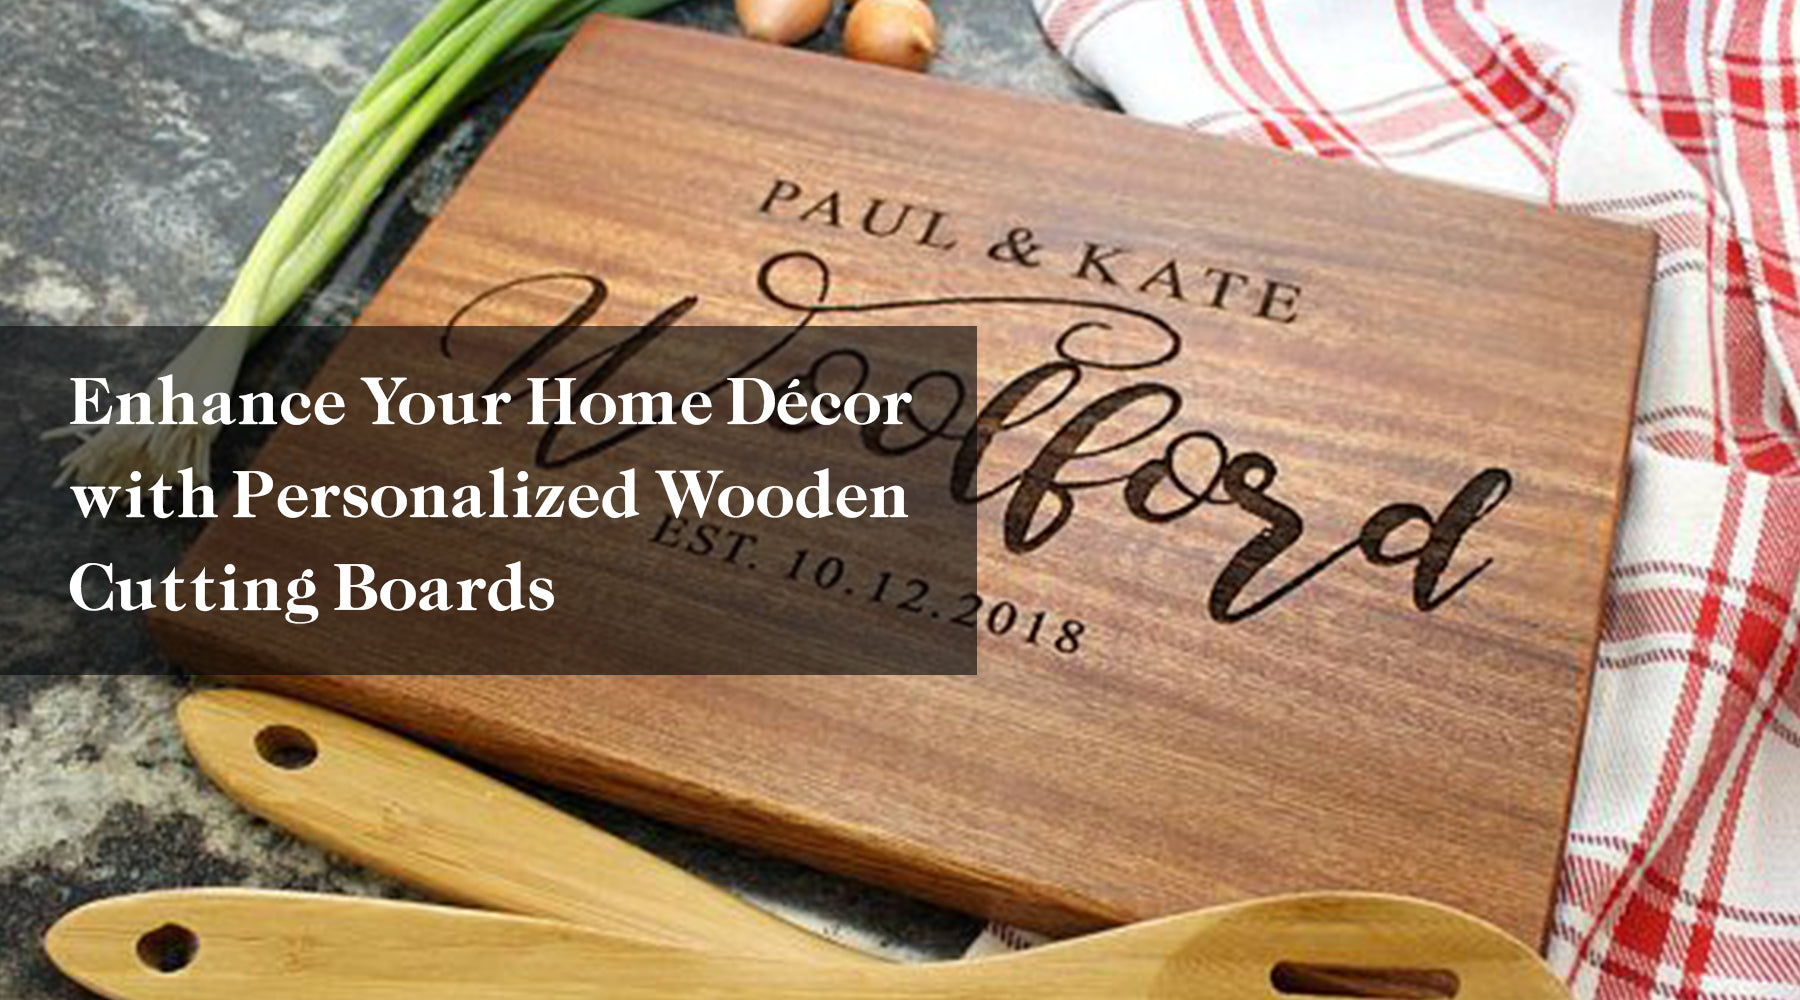 Enhance Your Home Décor with Personalized Wooden Cutting Boards